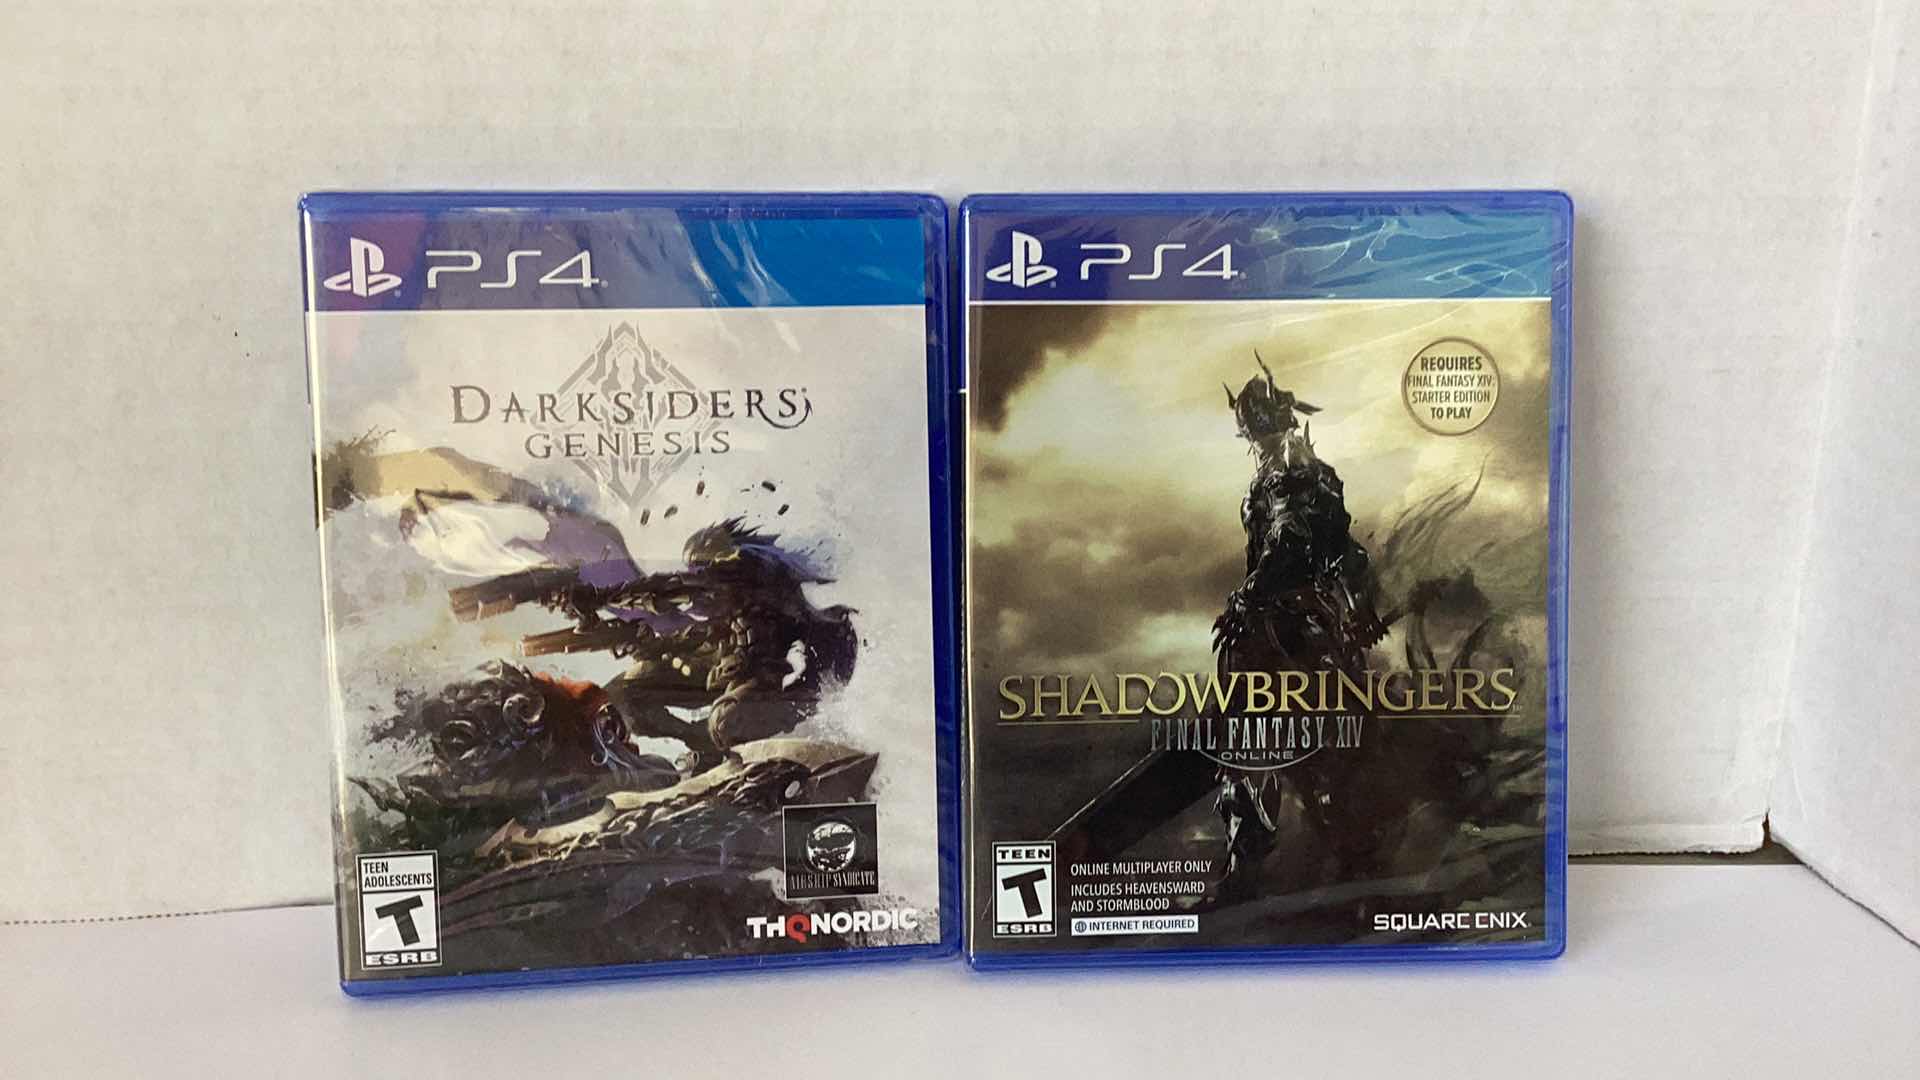 Photo 1 of 2 NEW PS4 GAMES: DARKSIDERS GENESIS AND SHADOWBRINGERS FINAL FANTASY XIV